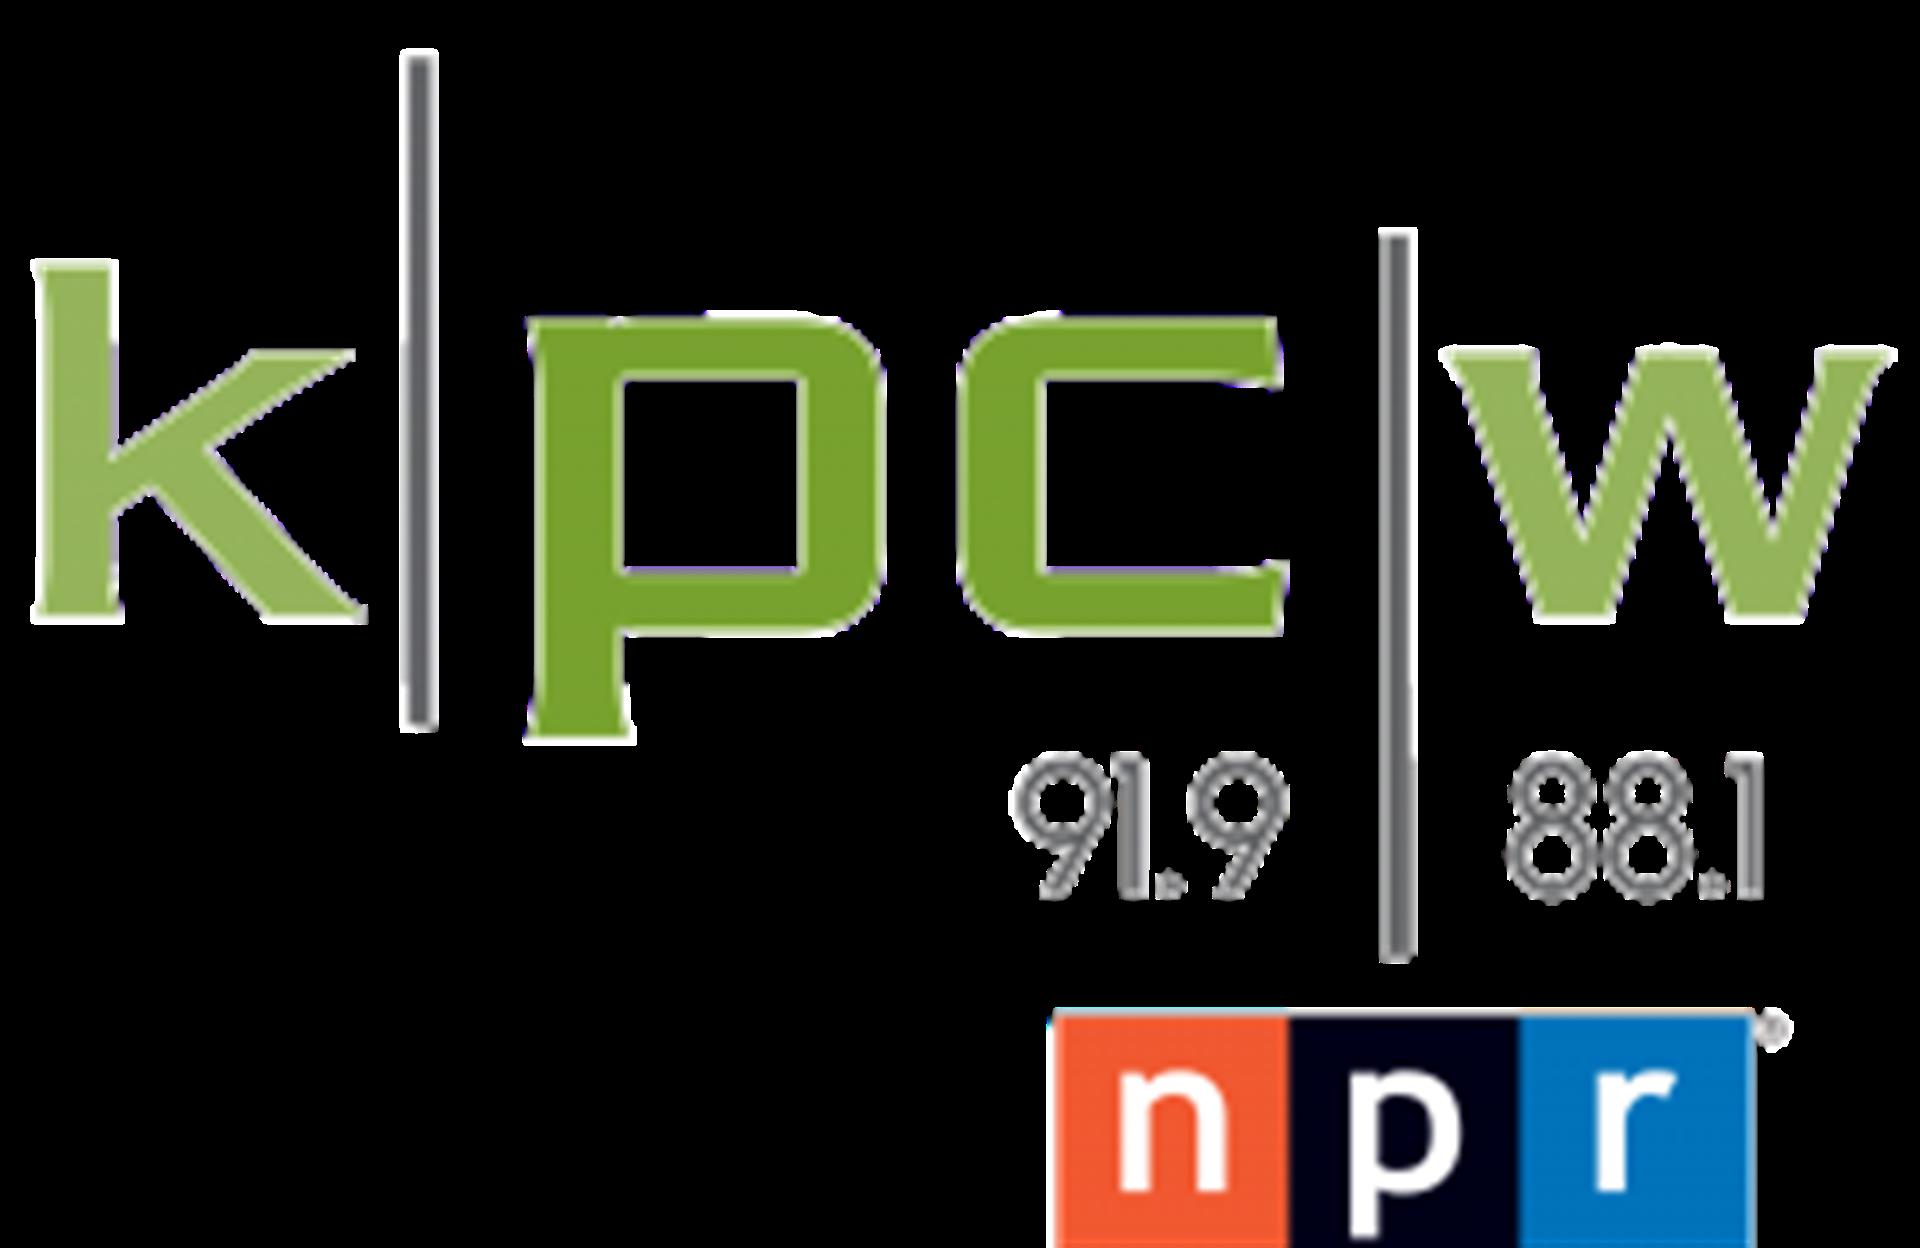 kpcw_logo_with_numbers_color_npr_png_outlined300x195